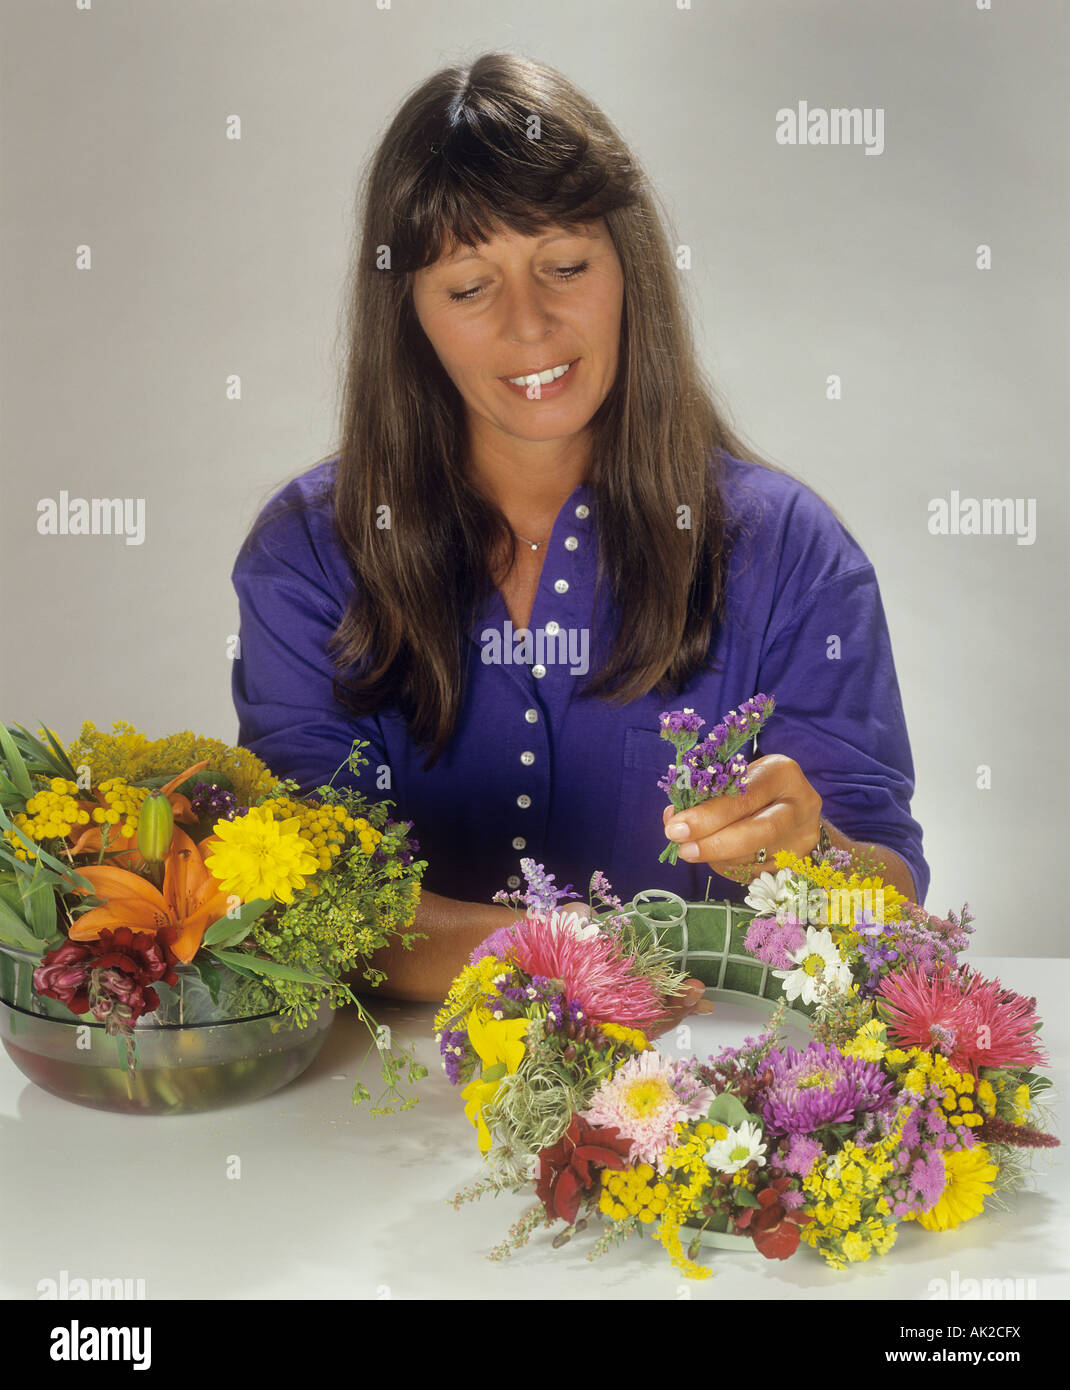 woman making wreath with flowers Stock Photo